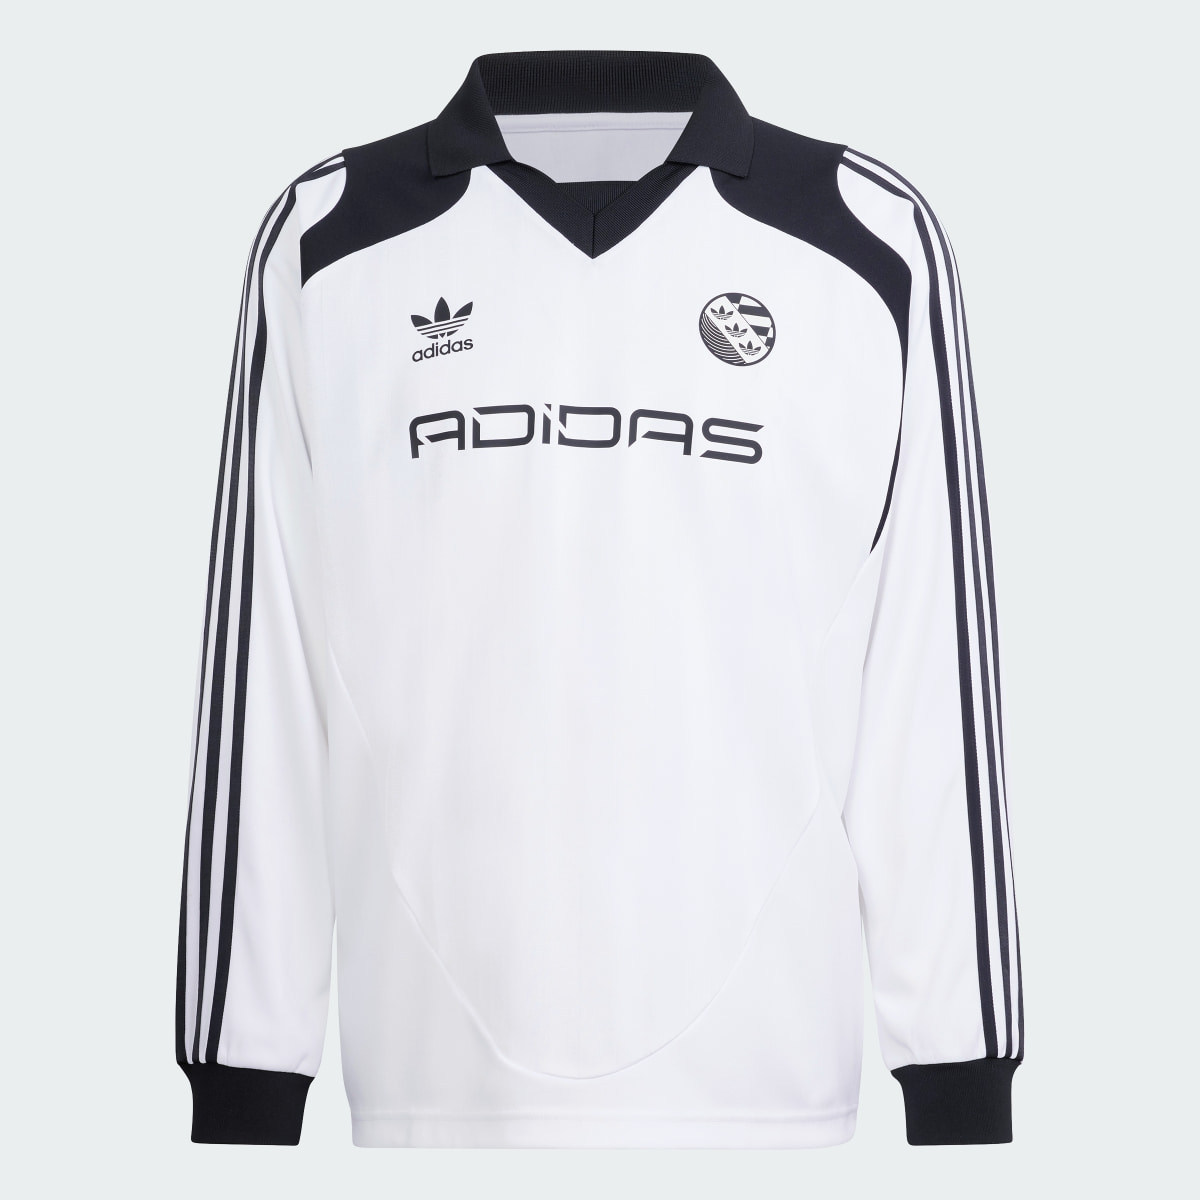 Adidas Maillot manches longues oversize. 5